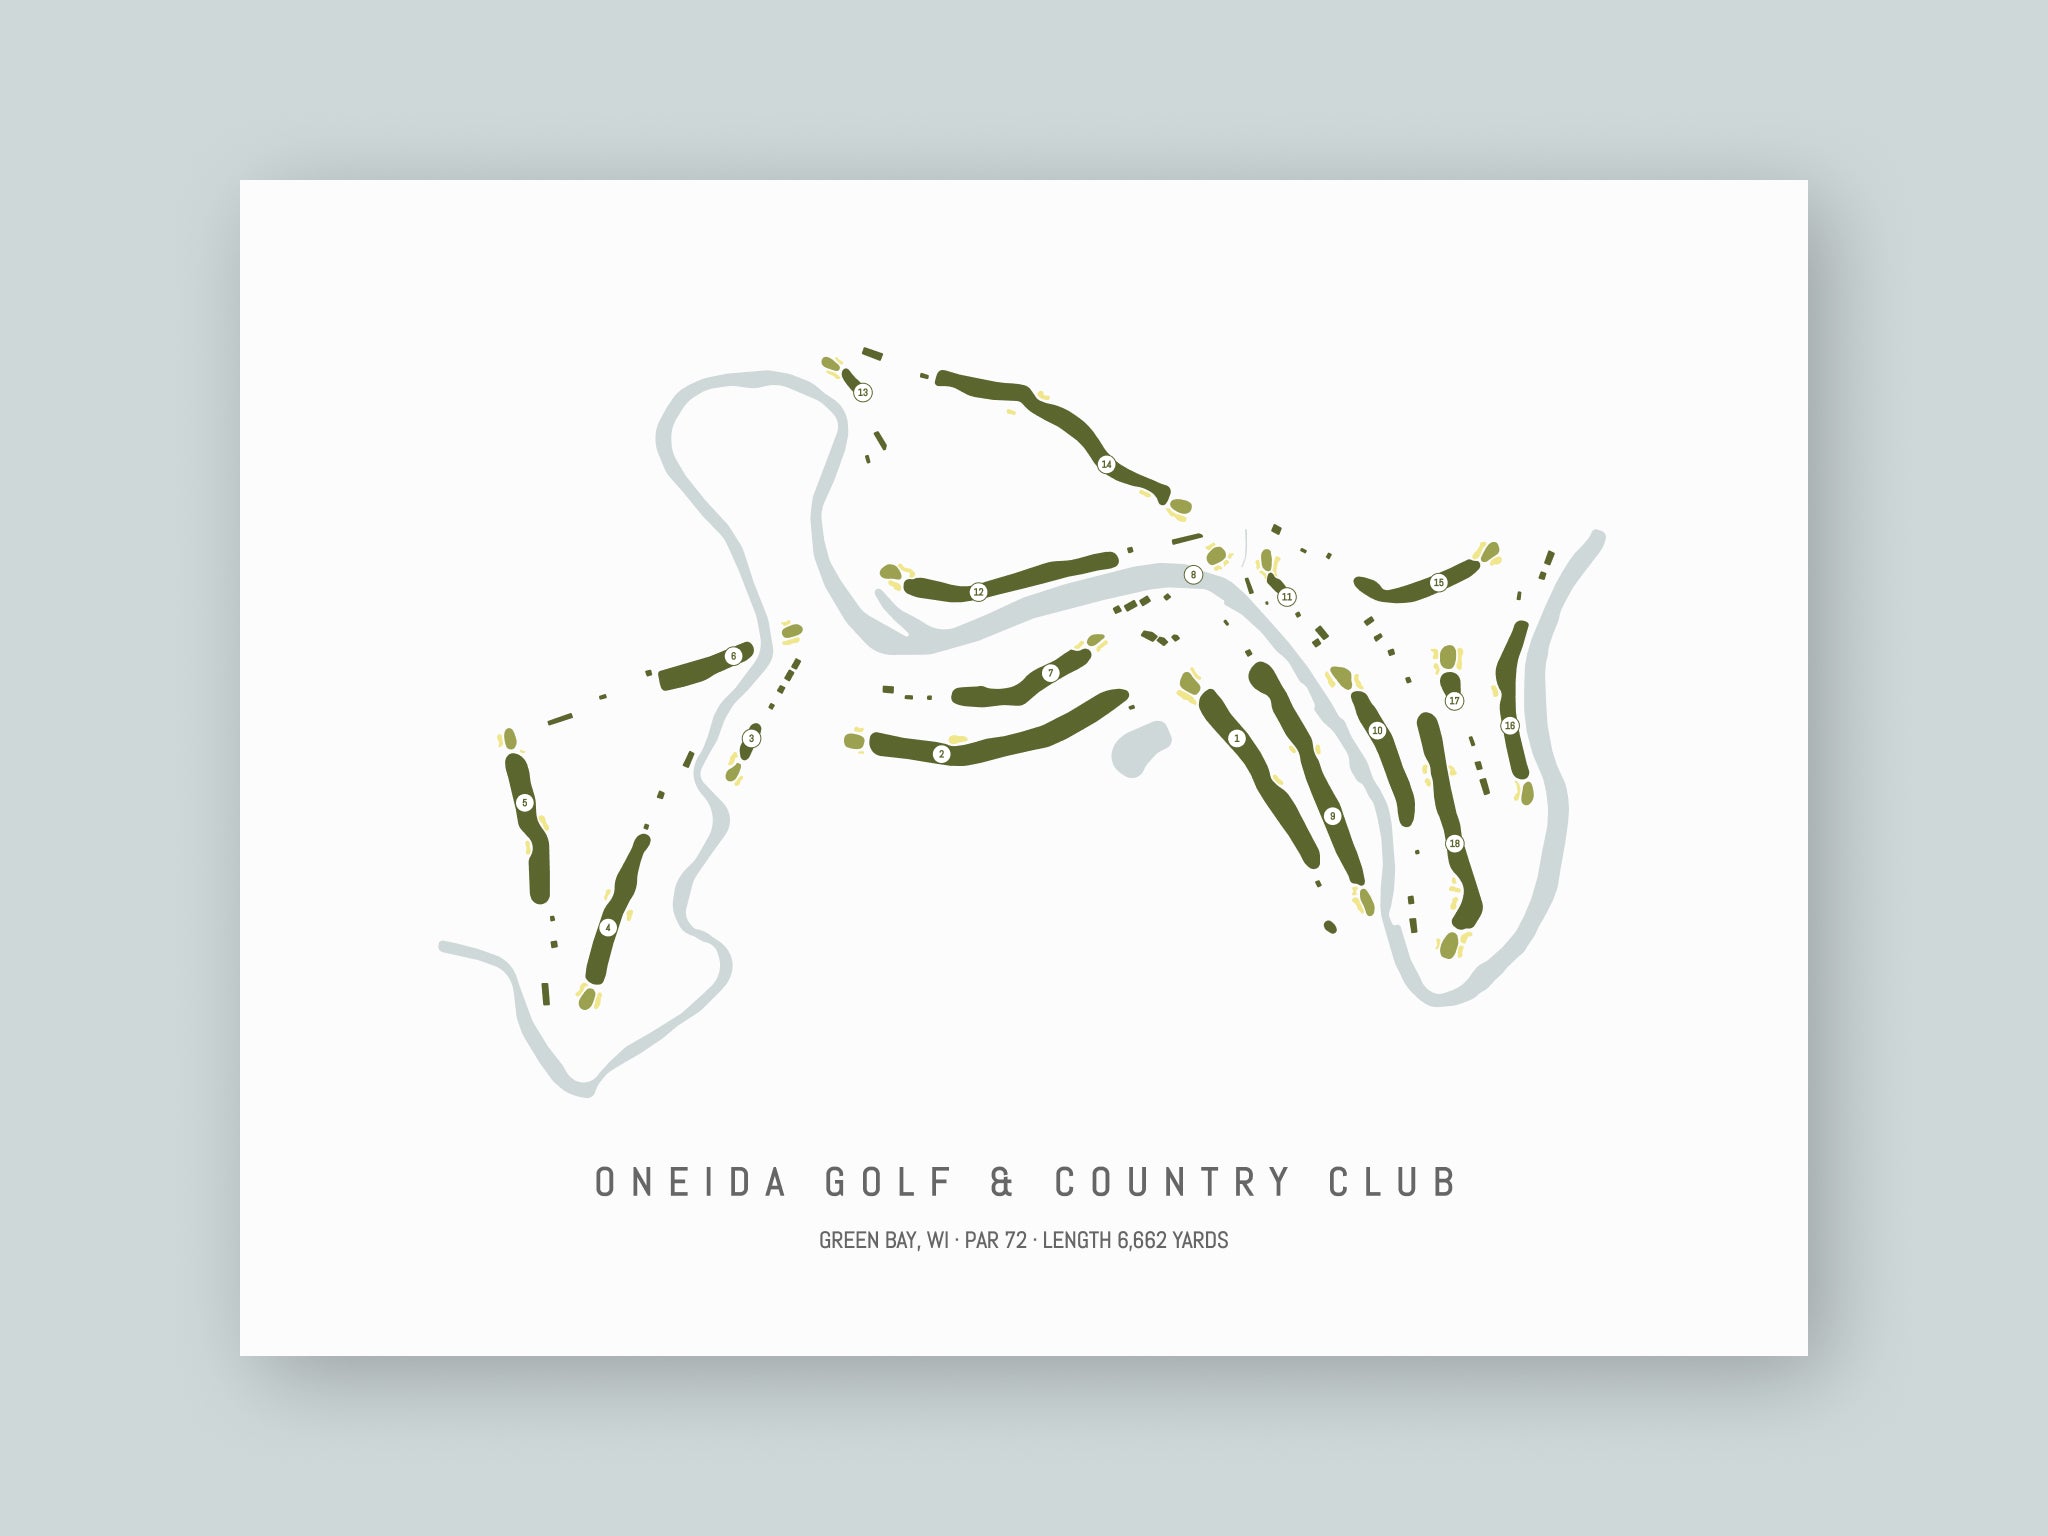 Oneida-Golf-And-Country-Club-WI--Unframed-24x18-With-Hole-Numbers